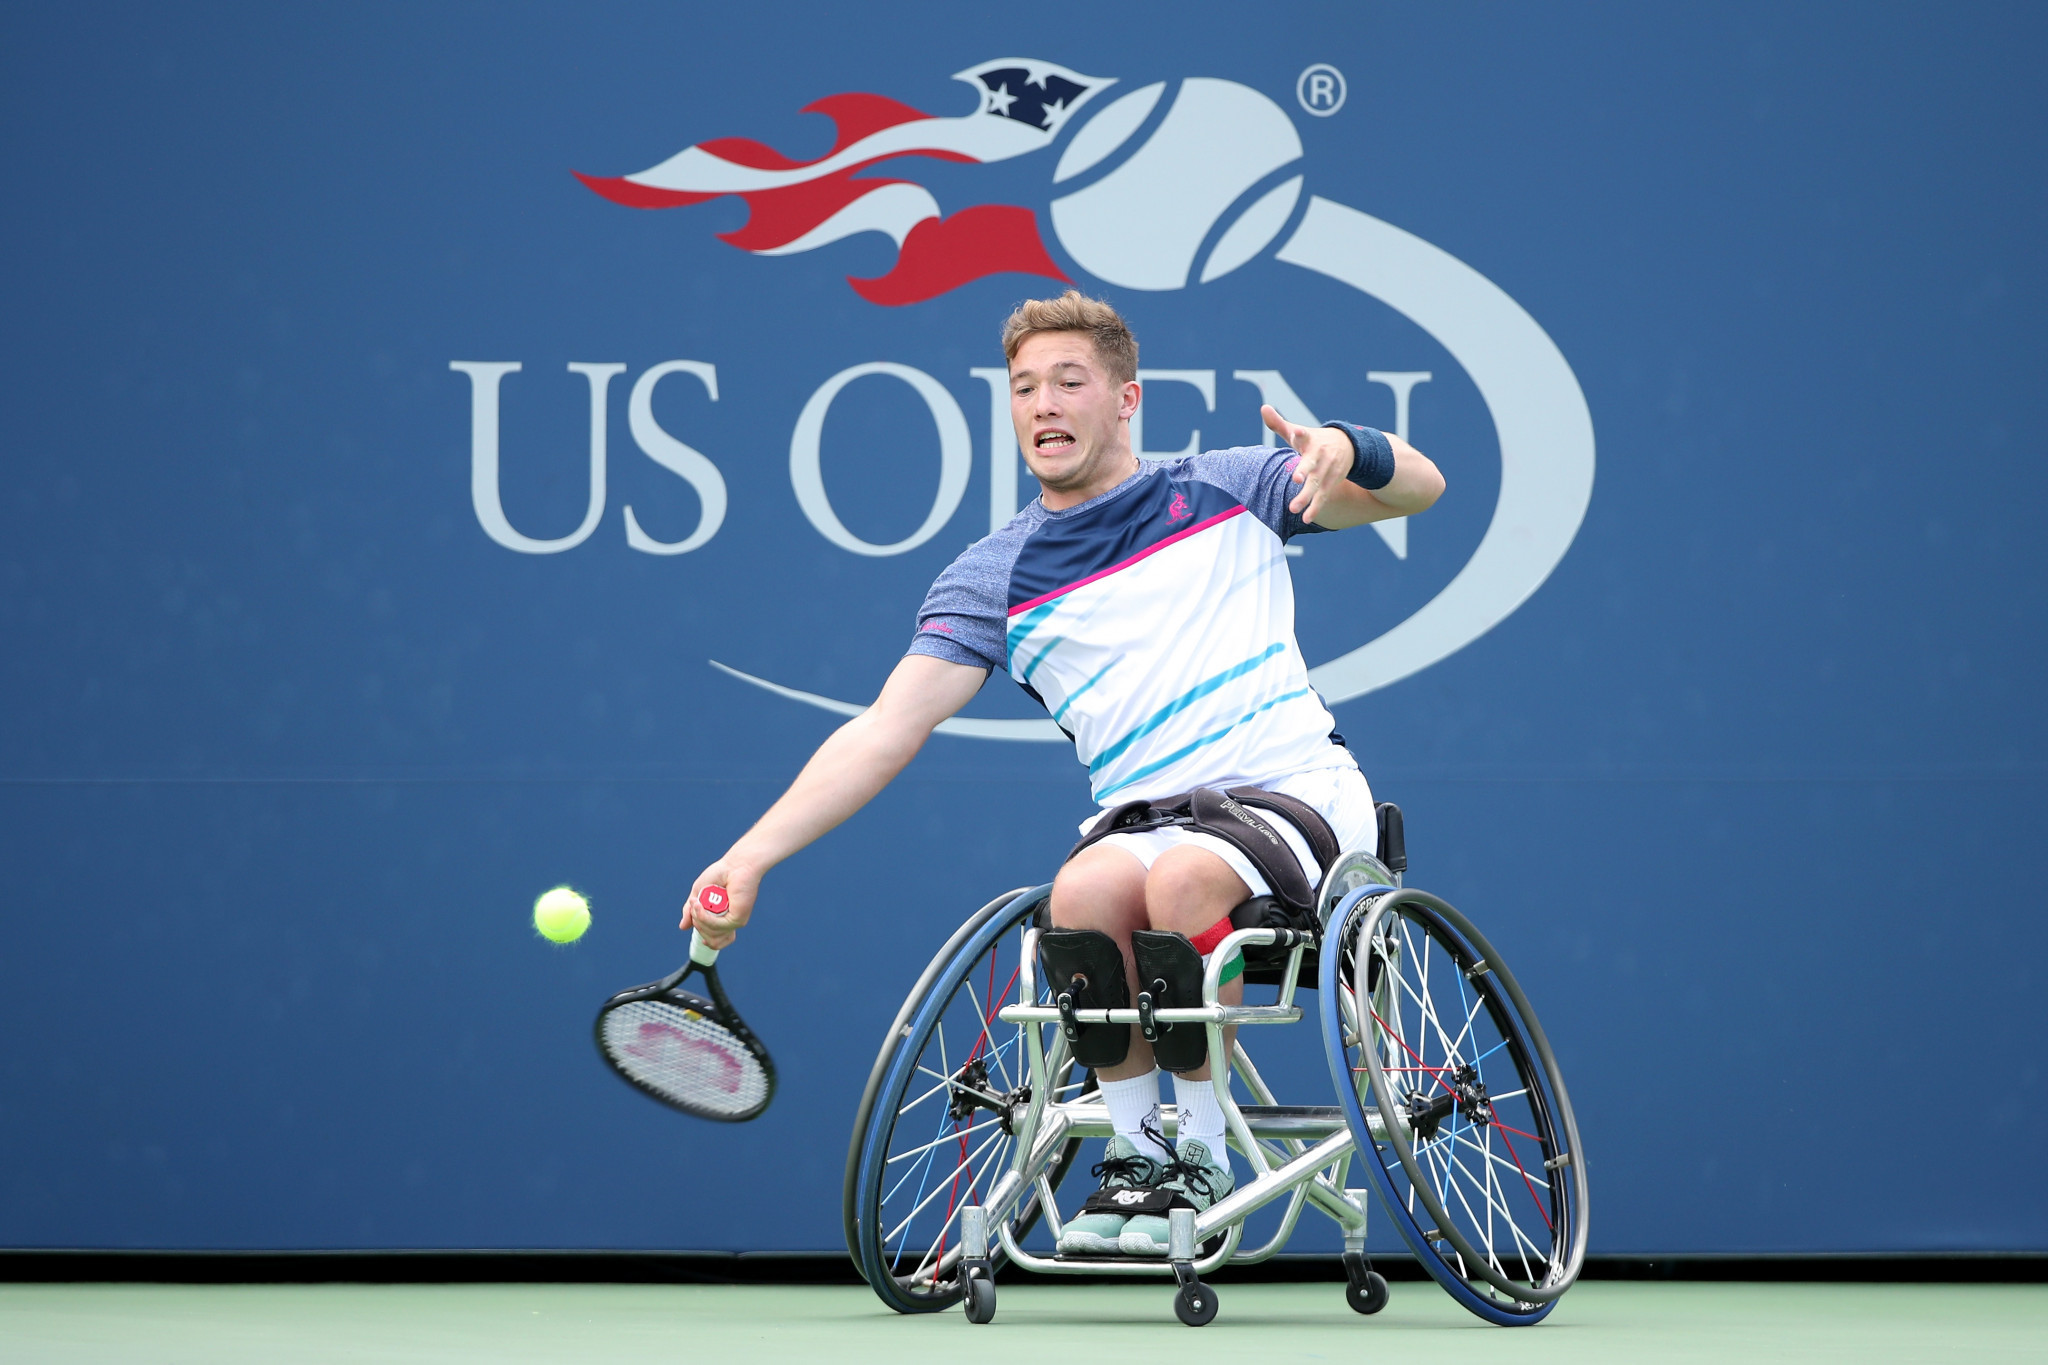 Alfie Hewett won an all-British semi-final at the US Open today ©Getty Images